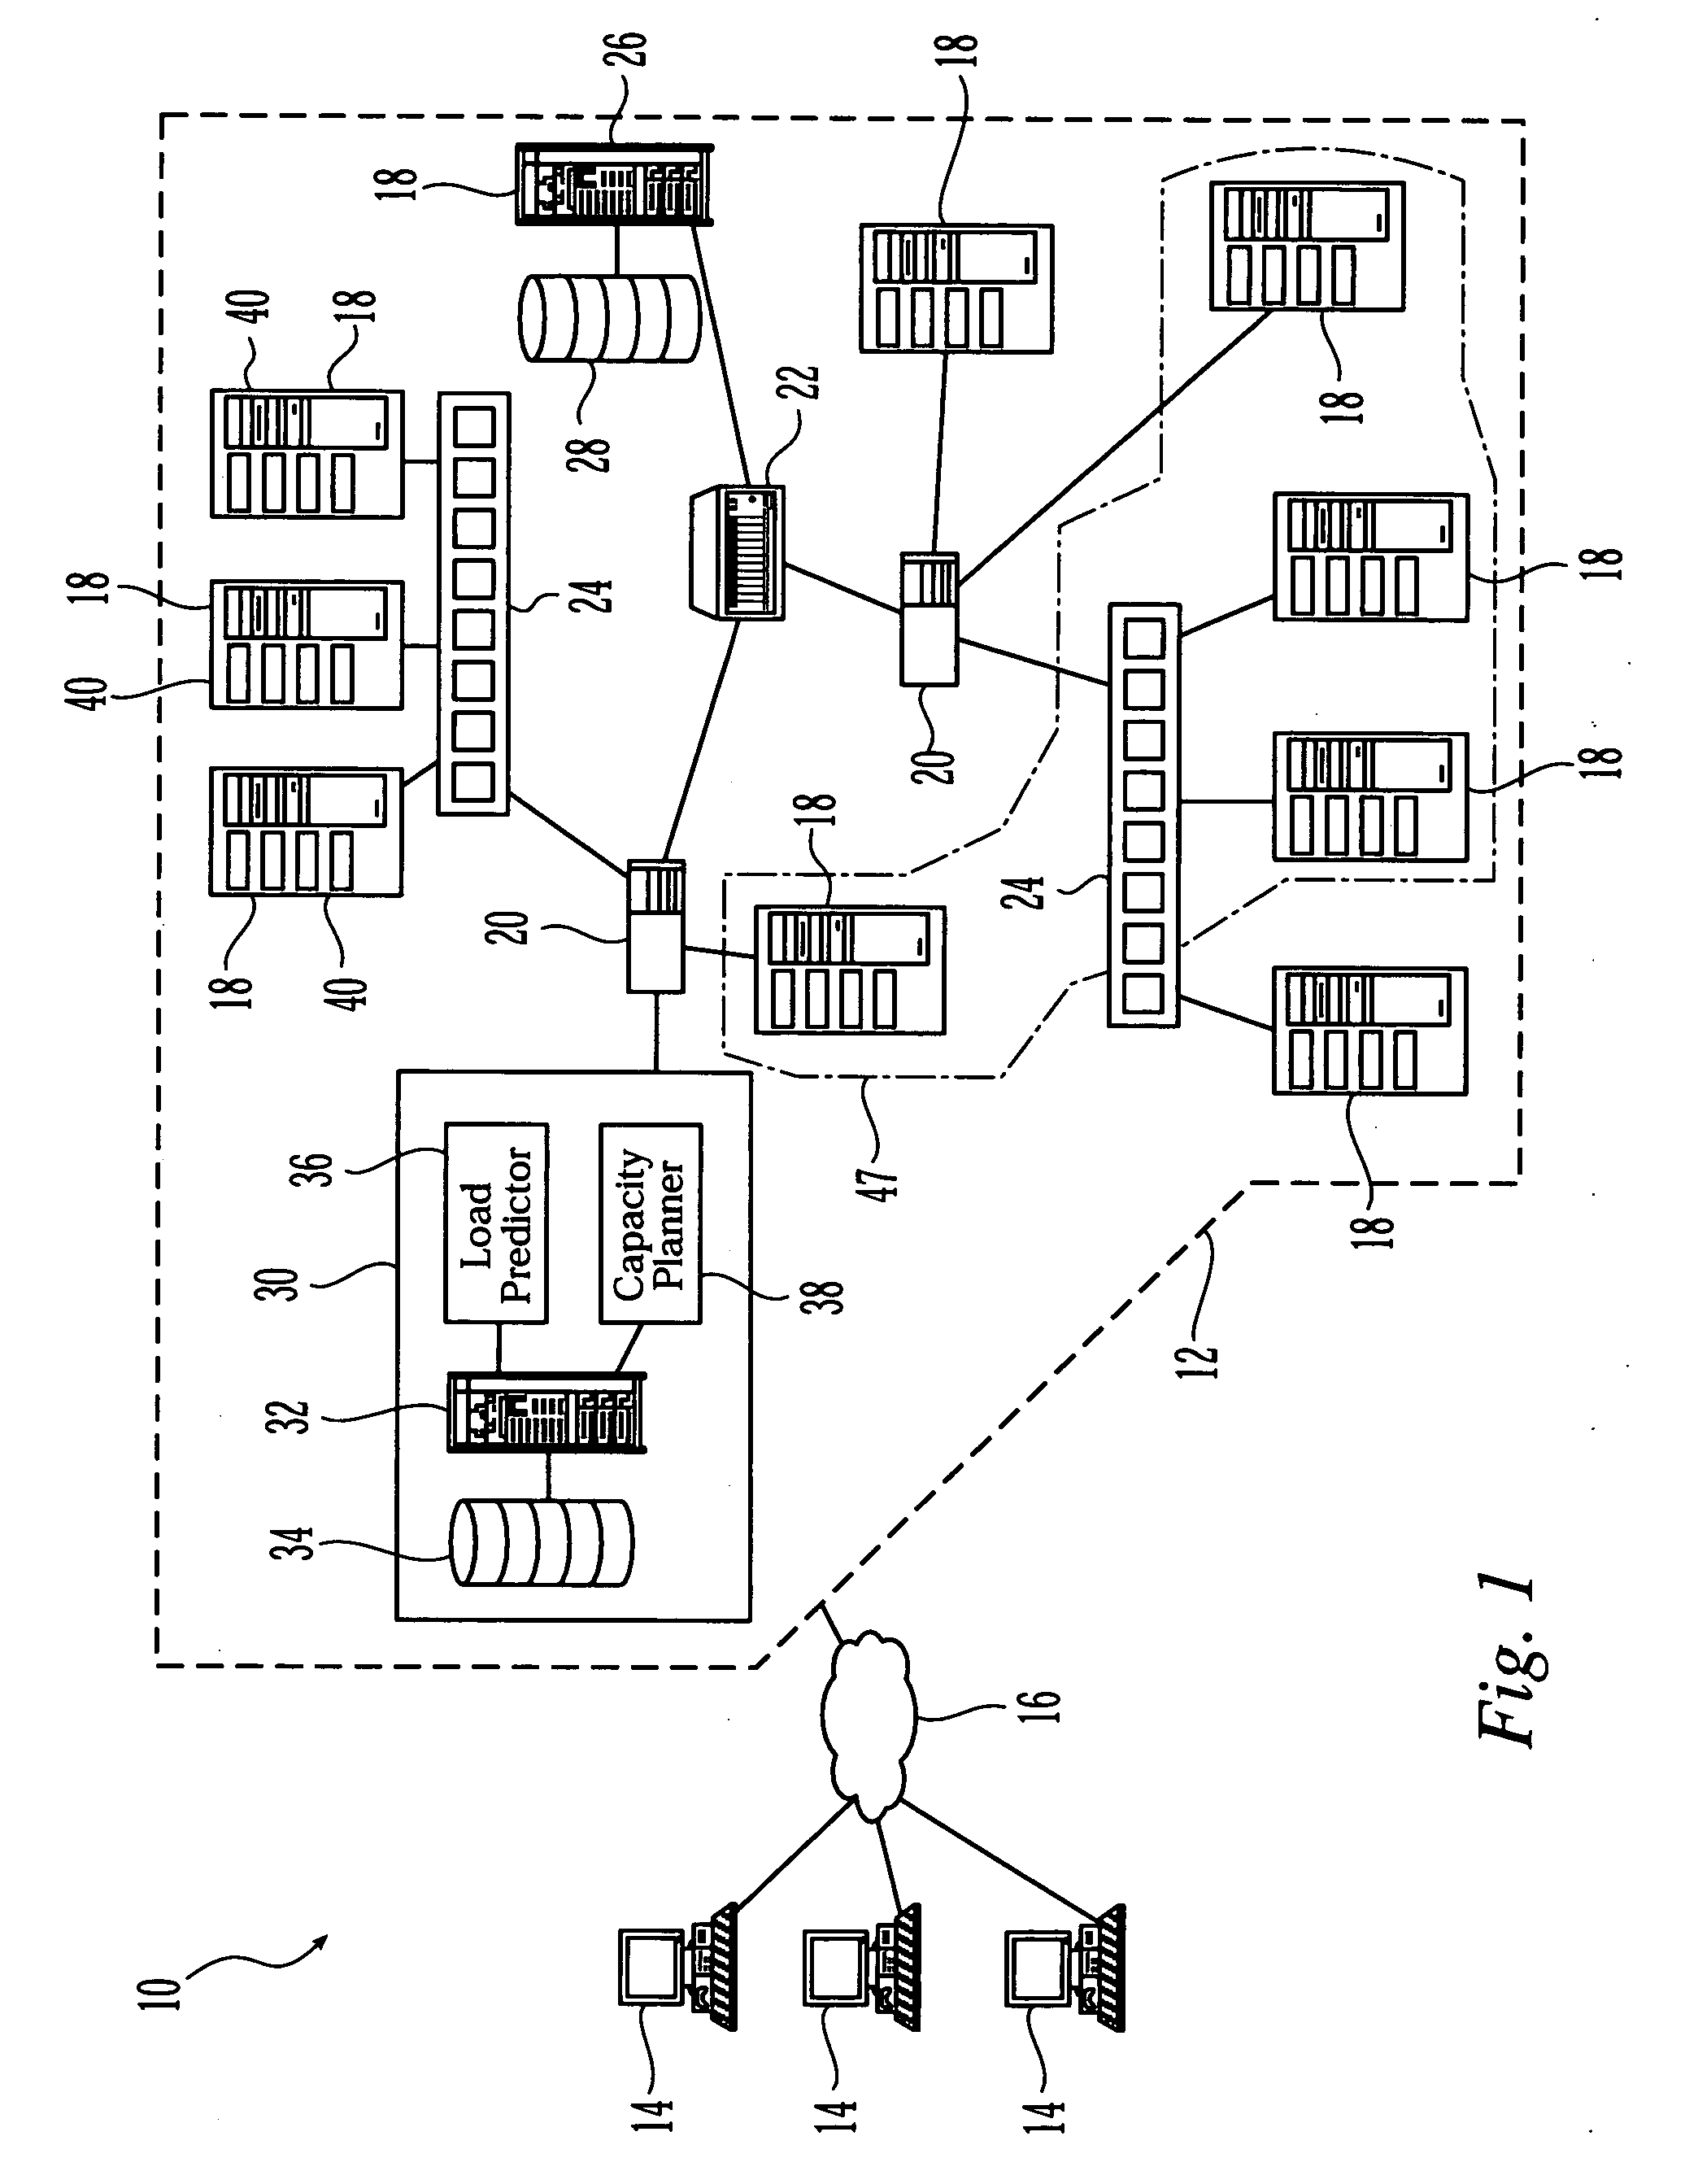 Method and apparatus for dynamic application upgrade in cluster and grid systems for supporting service level agreements